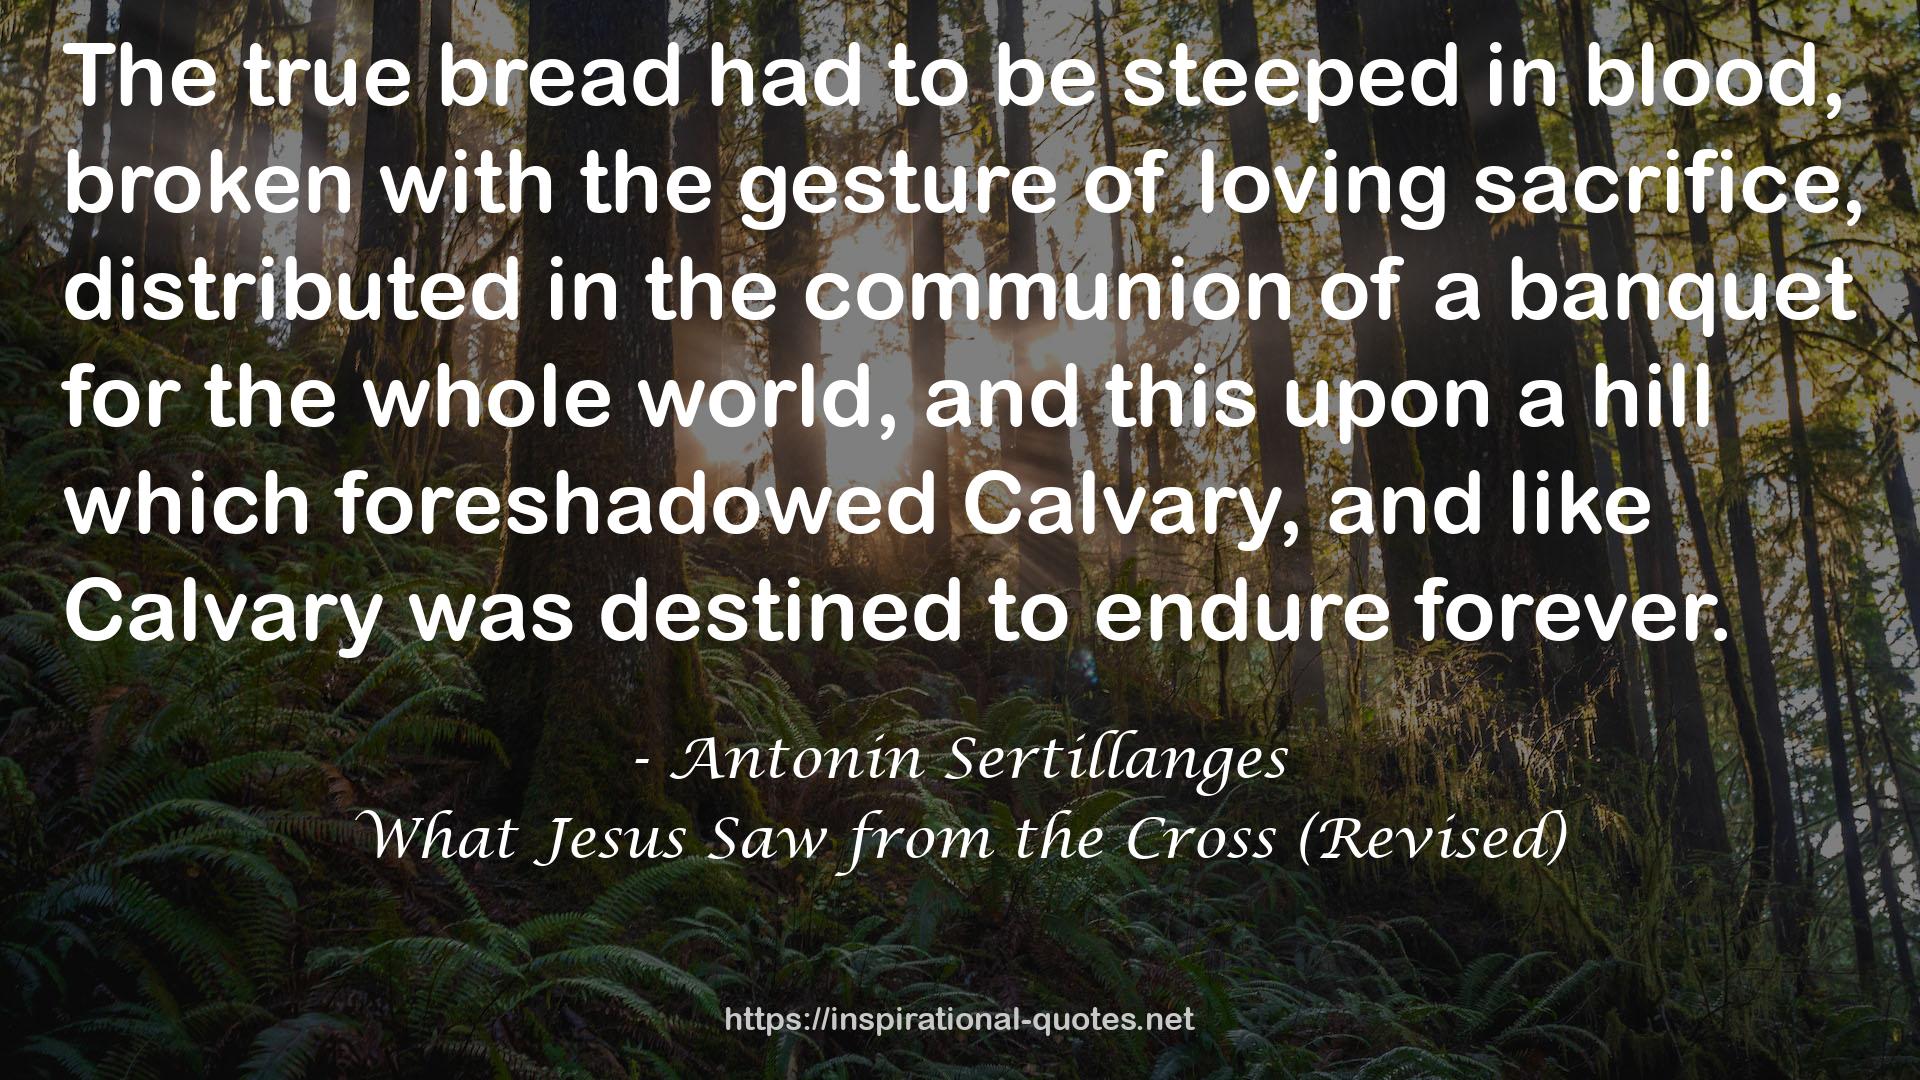 What Jesus Saw from the Cross (Revised) QUOTES